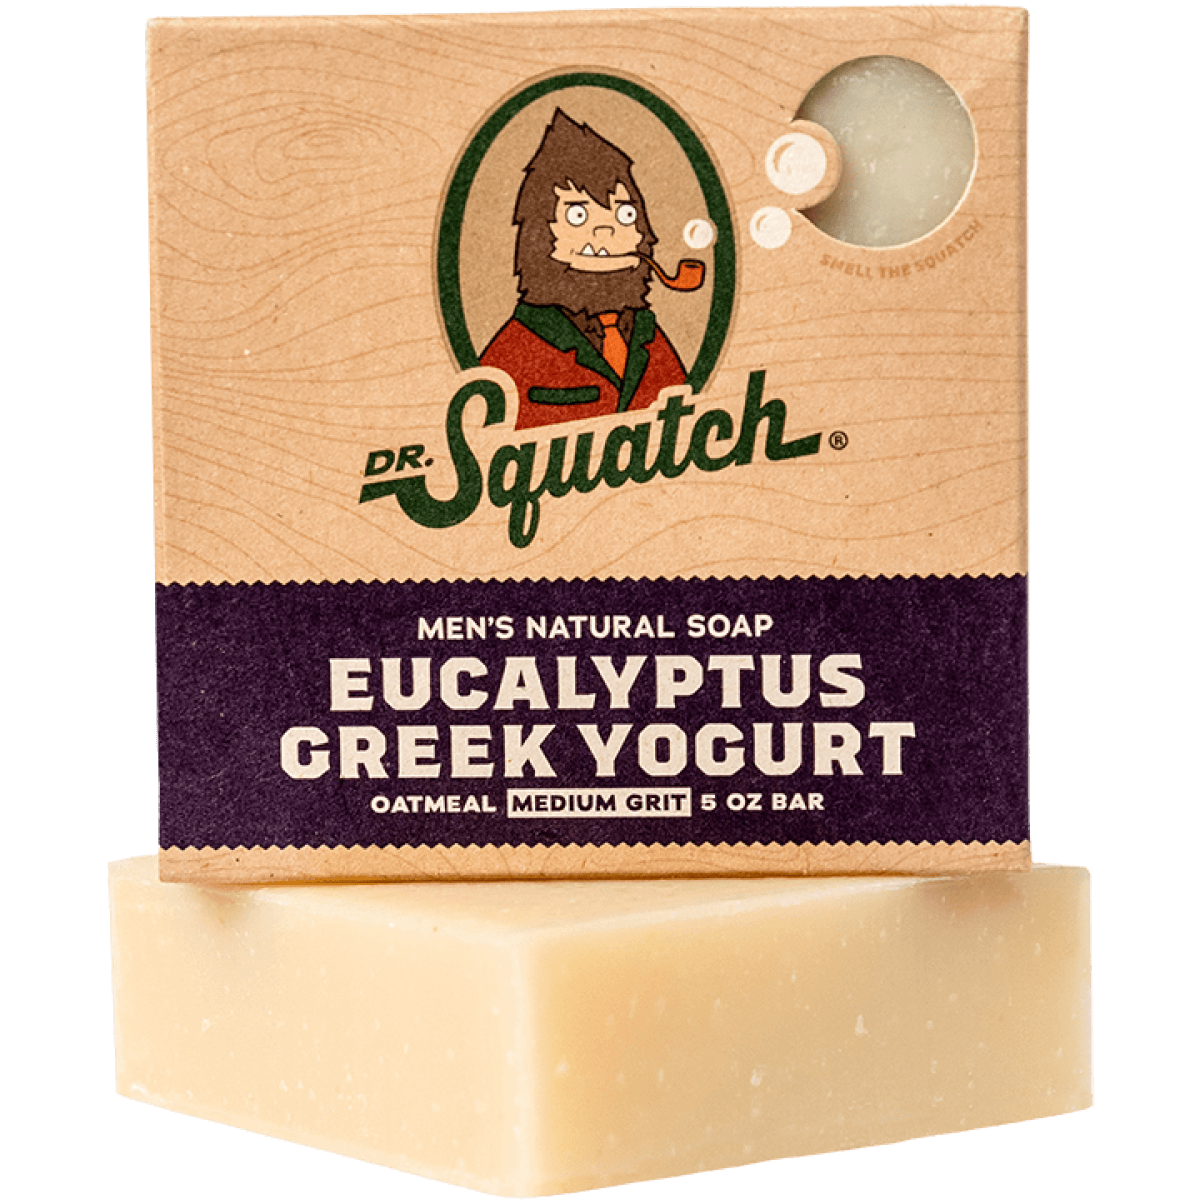 Dr. Squatch DISCONTINUED All Natural Bar Soap for Men with Zero